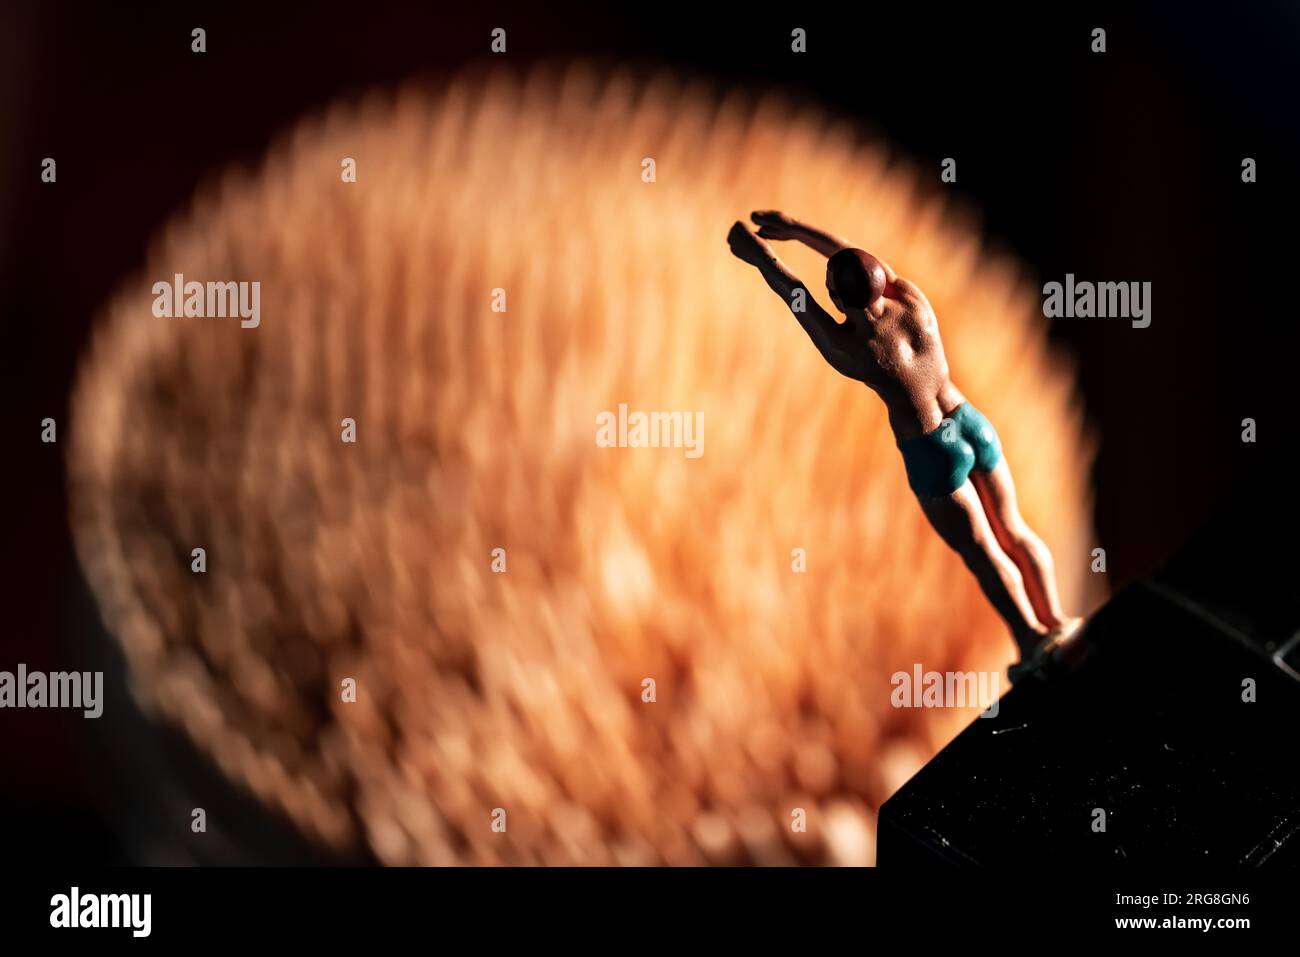 Miniature Olympic diver is ready to dive into a pool (made of out of focus toothpicks Stock Photo